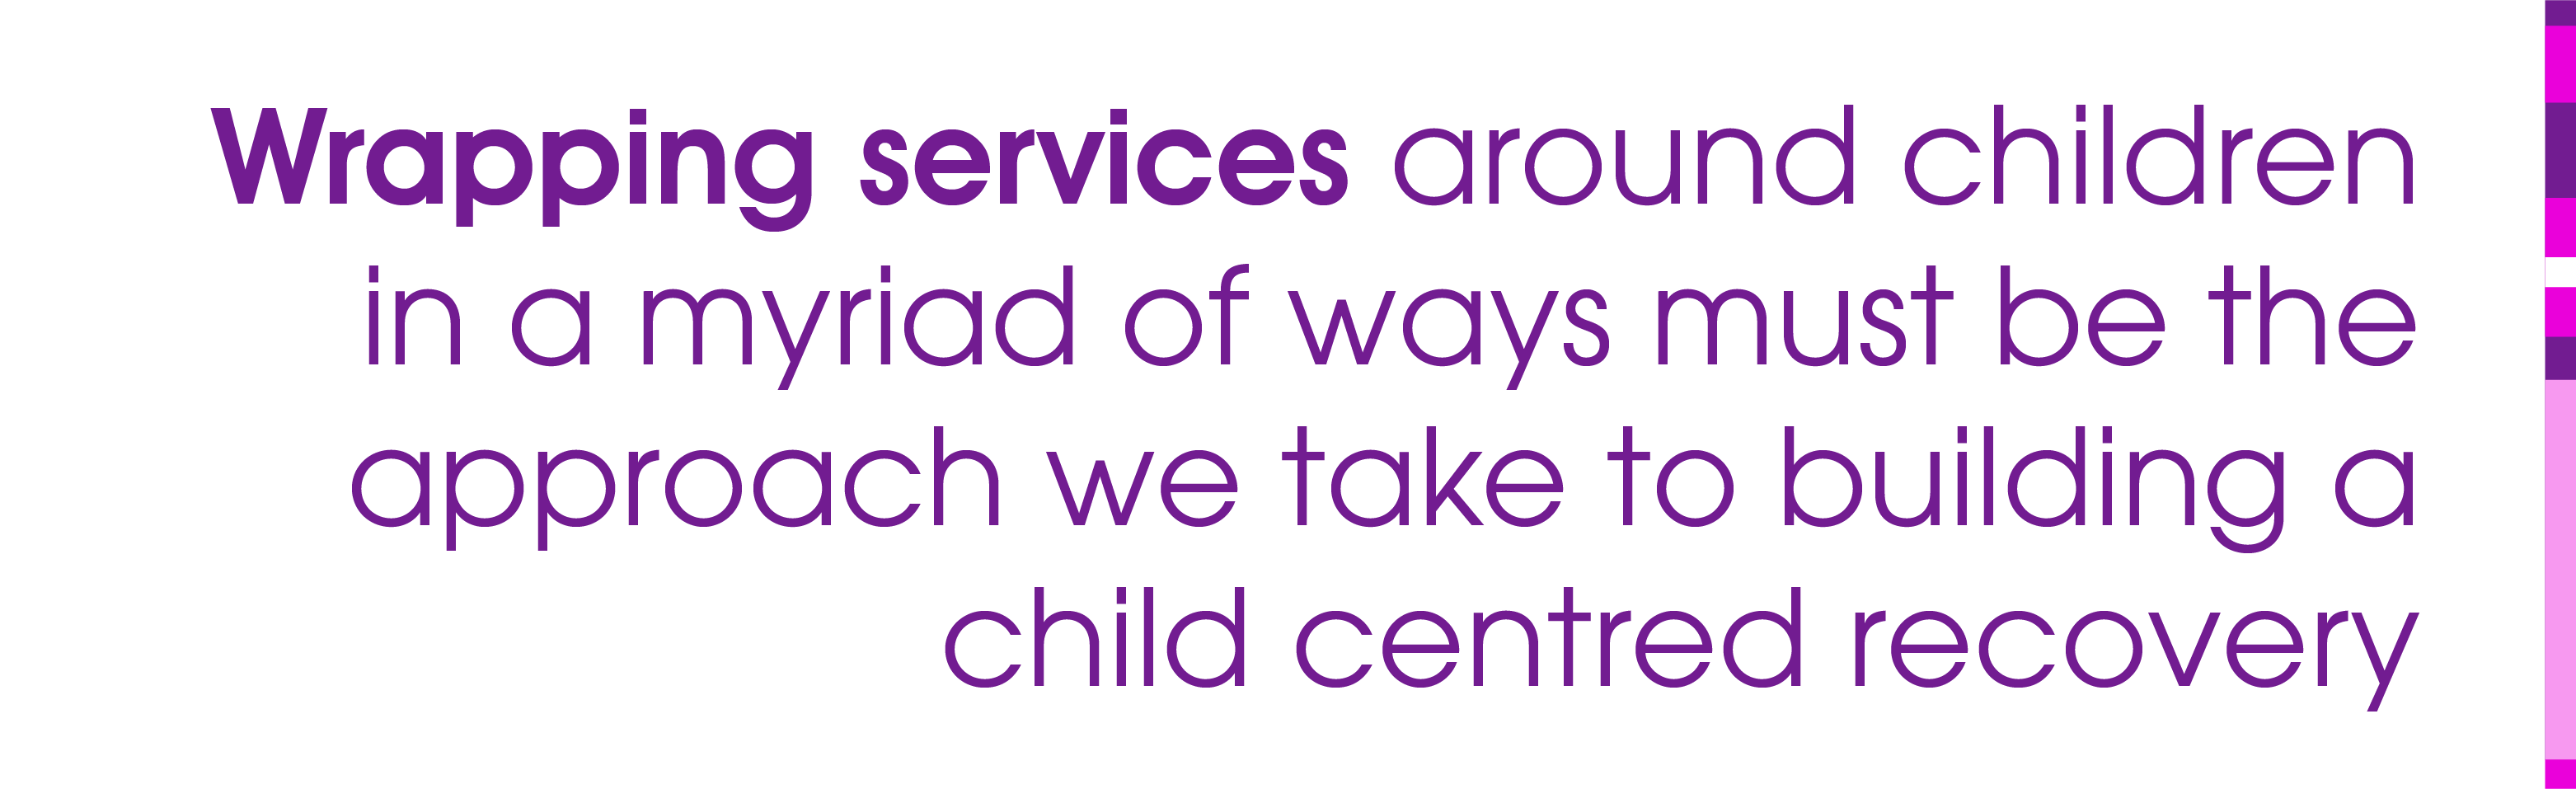 Wrapping services around children in a myriad of ways must be the approach we take to building a child centred recovery.